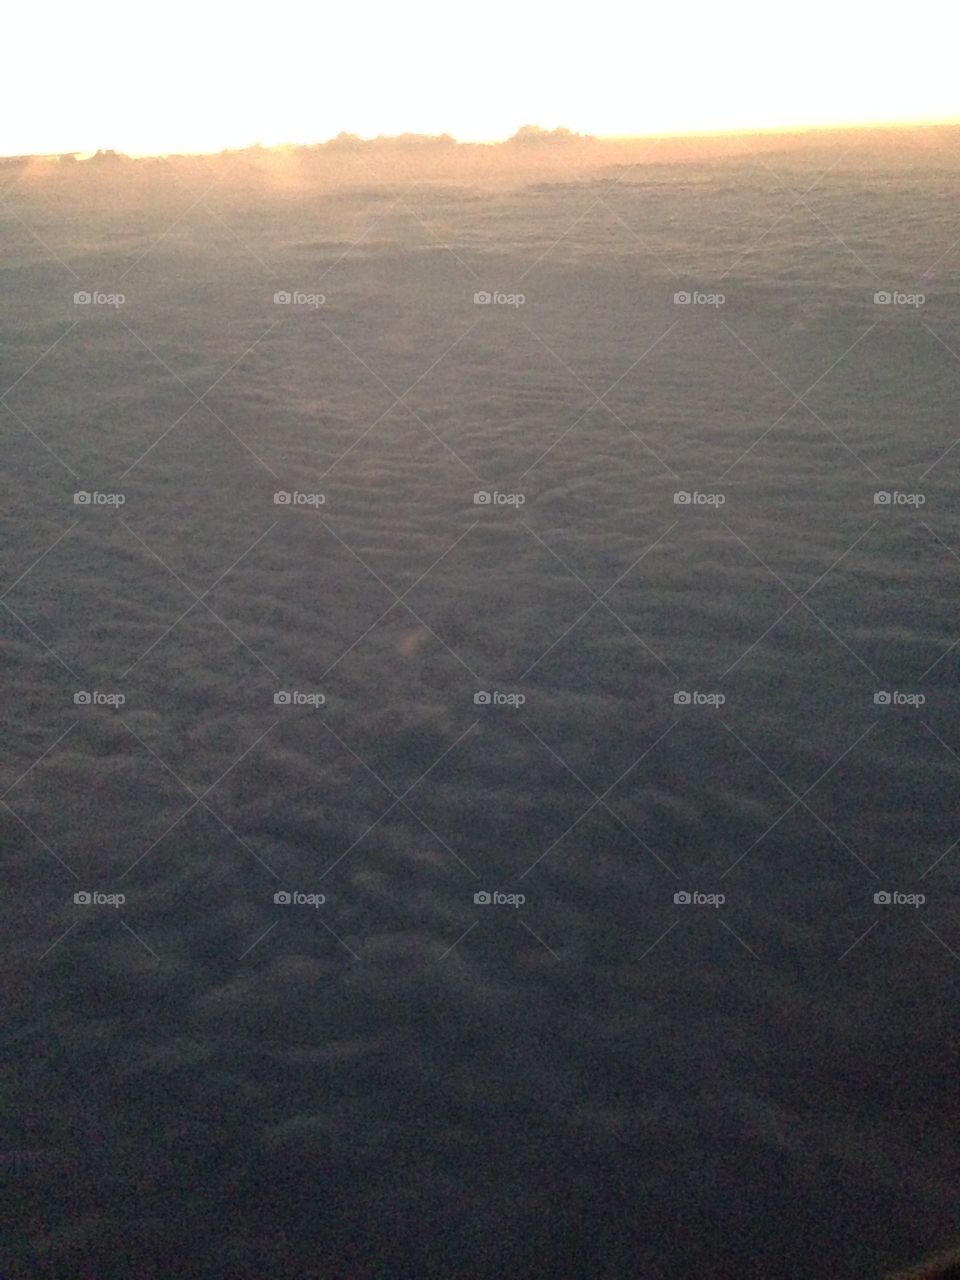 Picture of clouds from plane window.